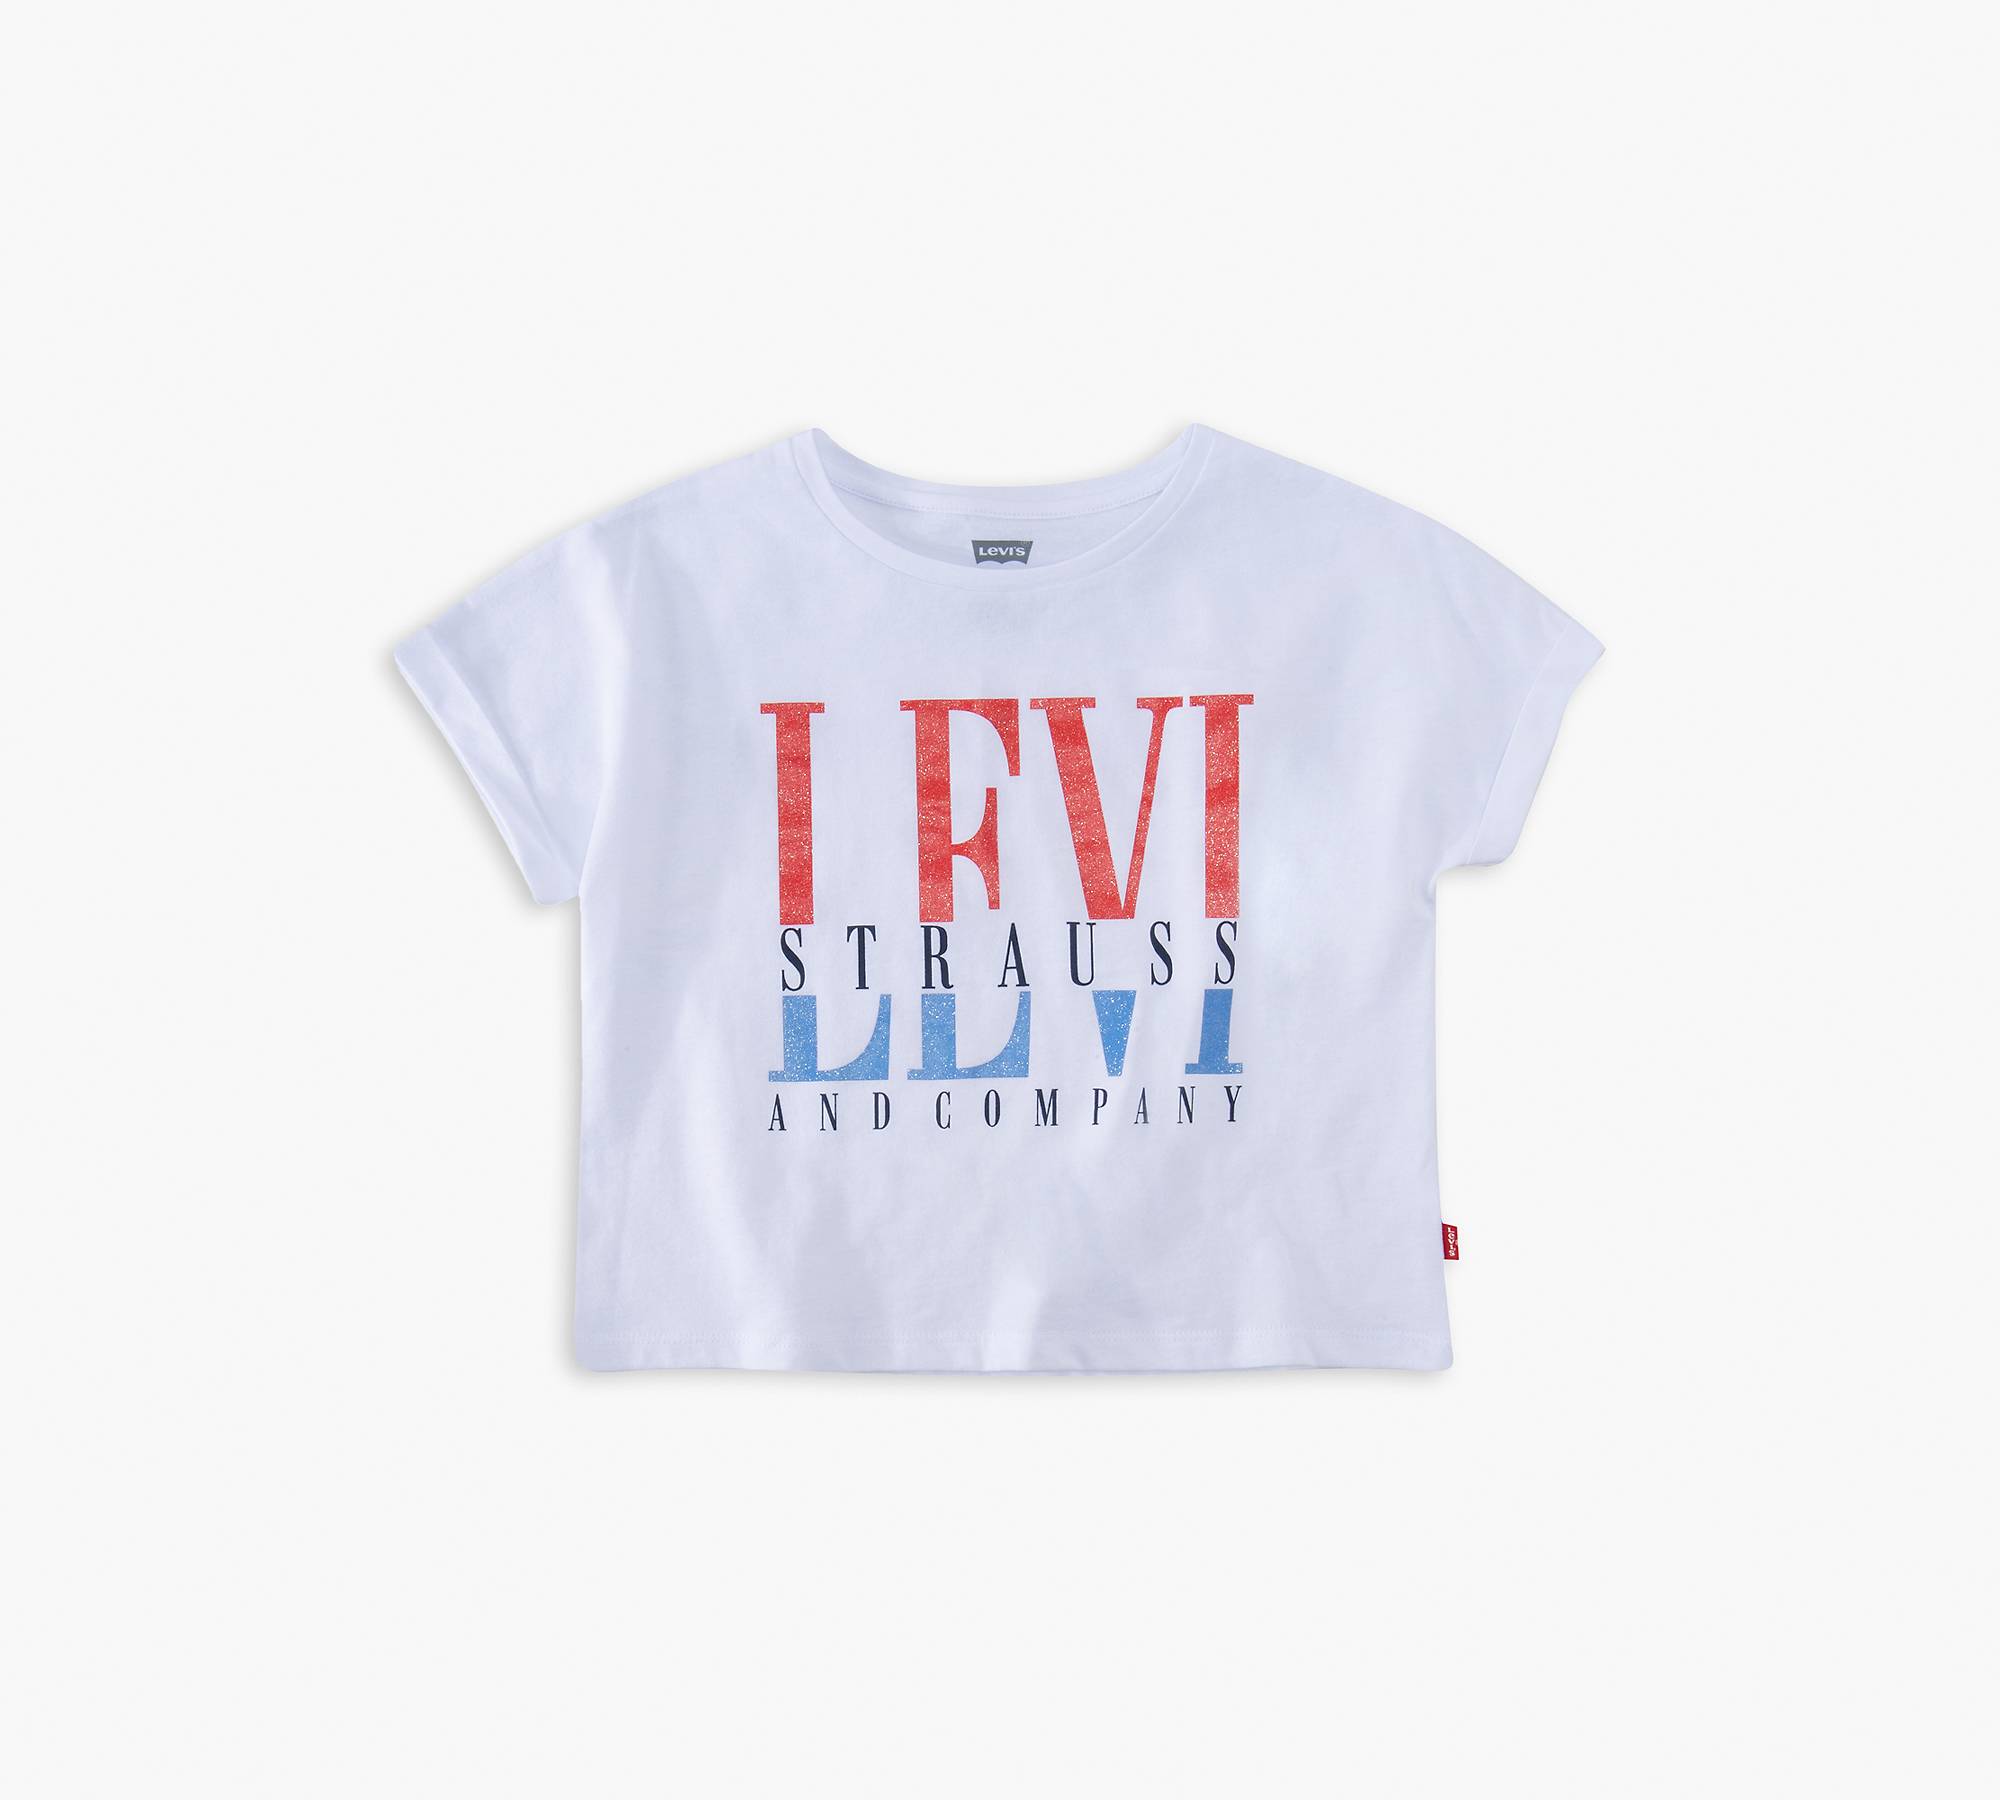 Toddler Girls 2t-4t Rolled Sleeve High Rise Top - White | Levi's® US